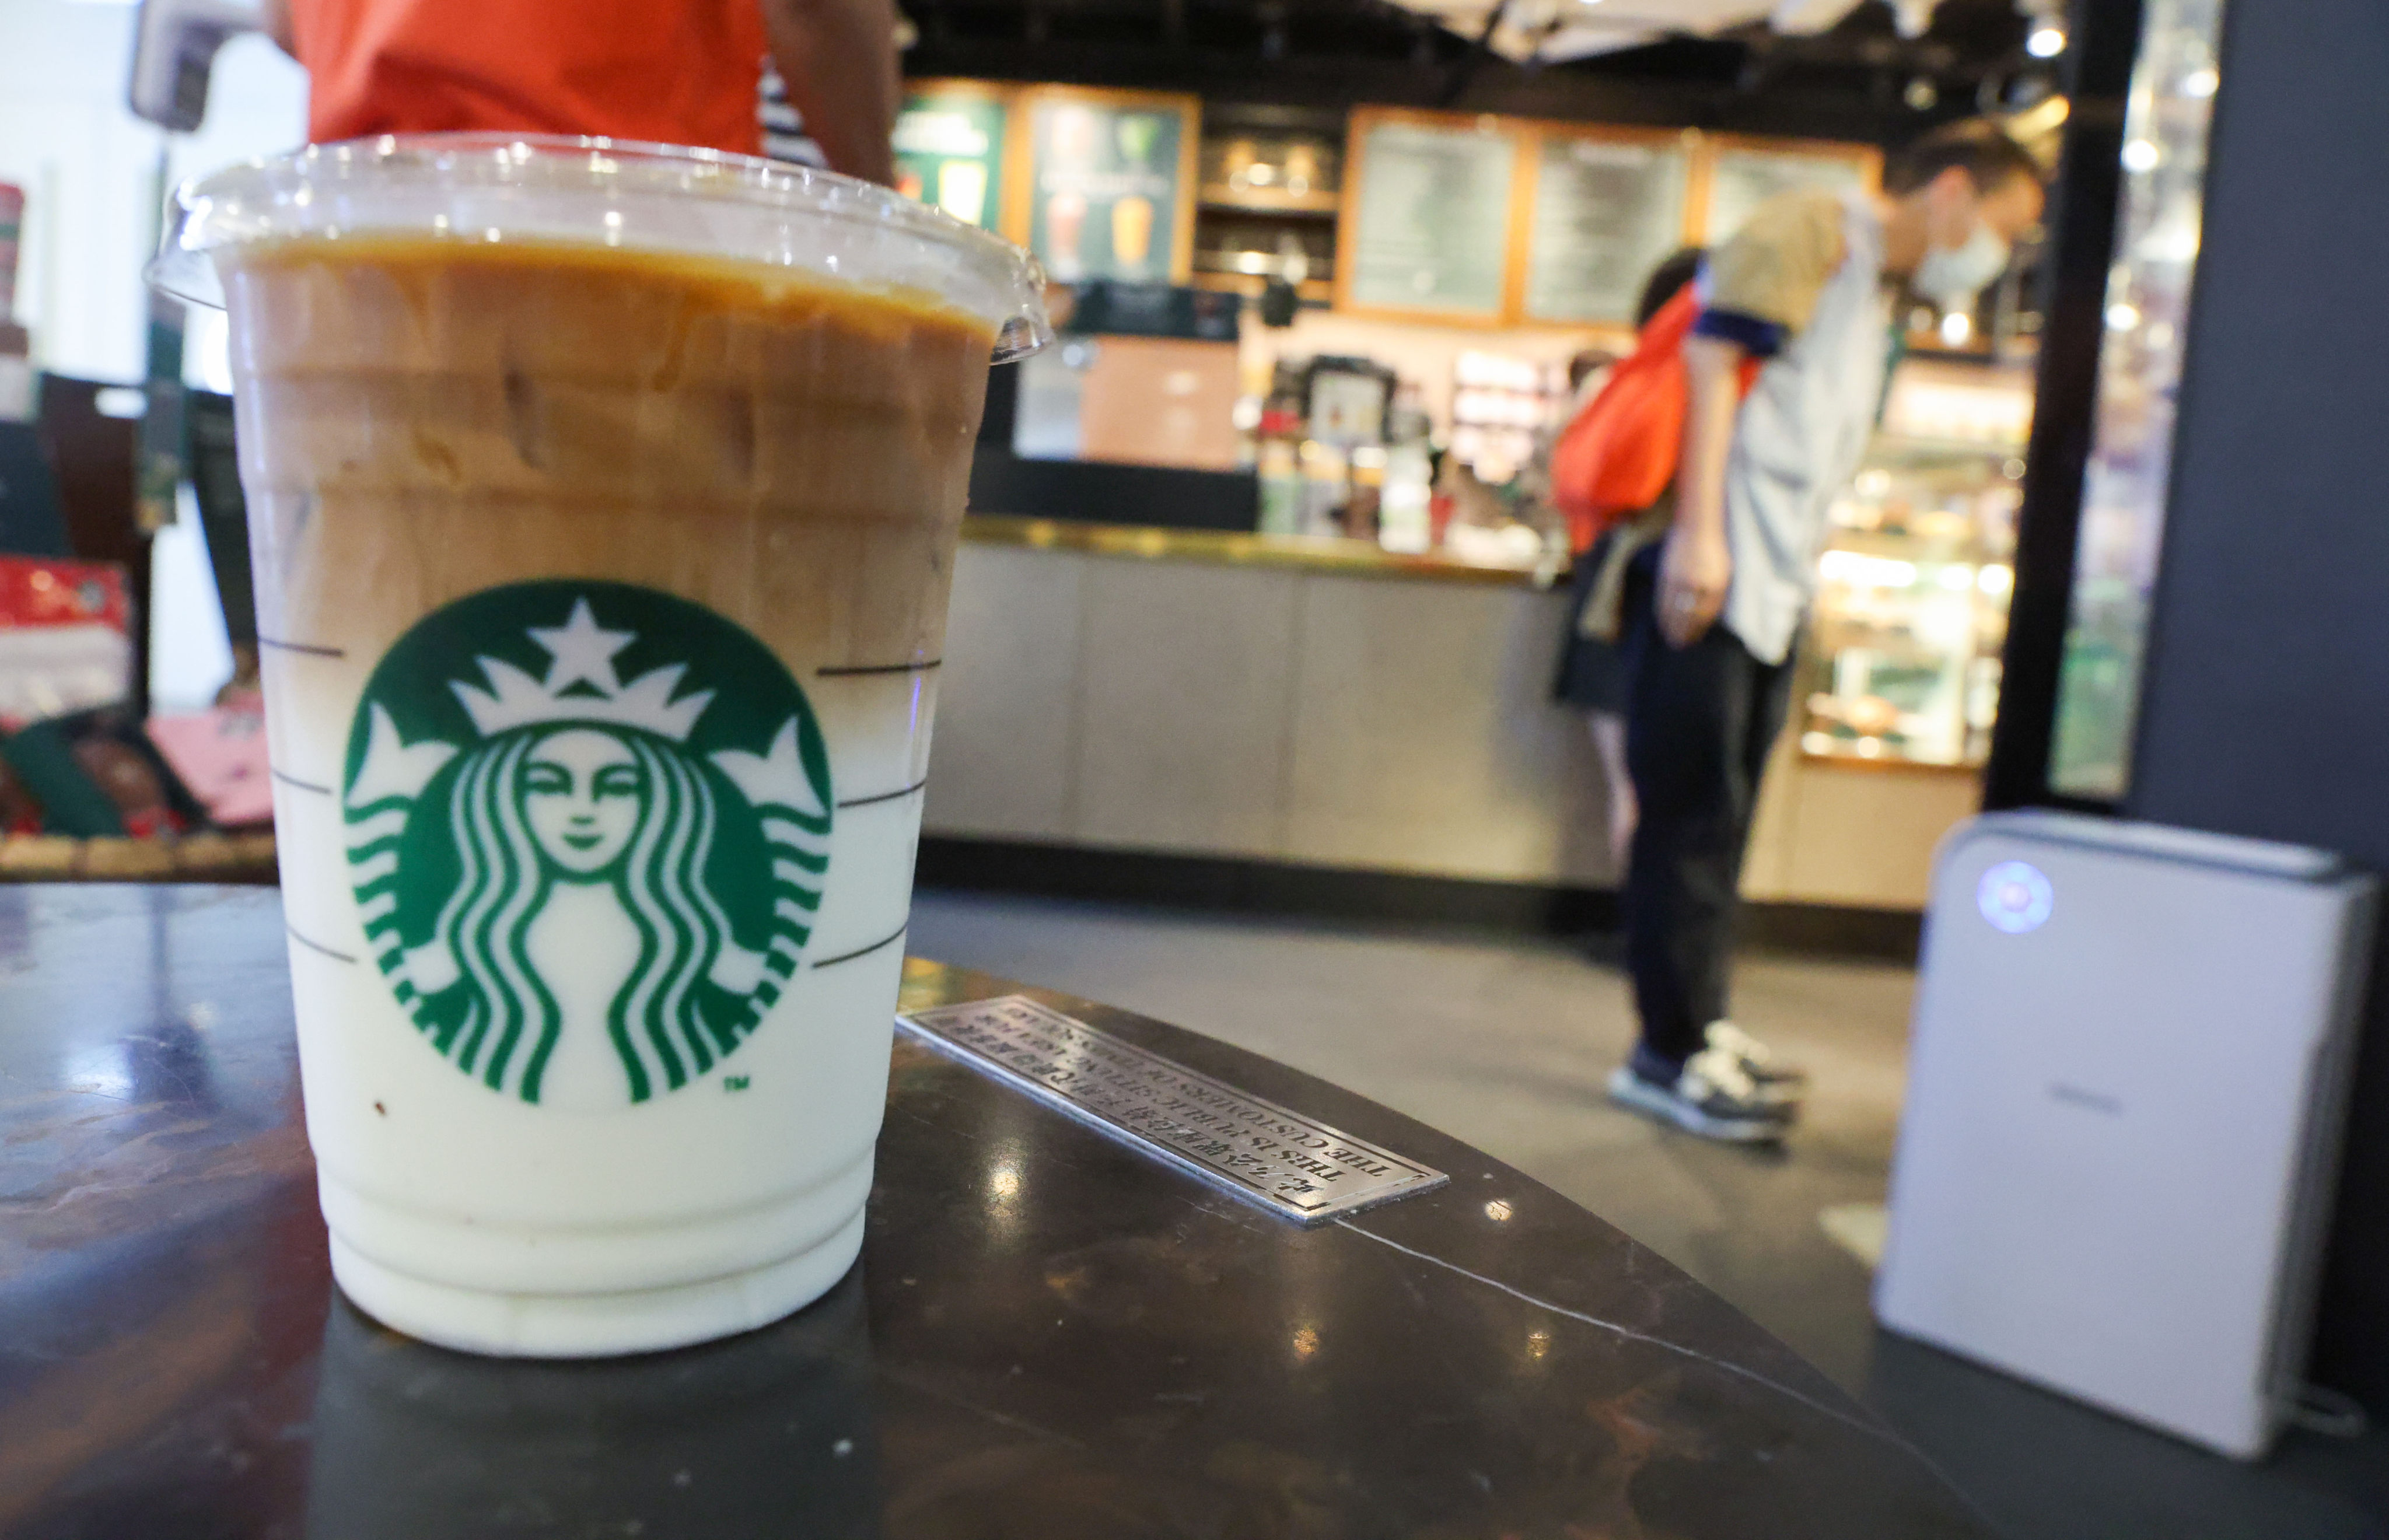 Starbucks Singapore has ‘discovered … some unauthorised access’ to customers details. Photo: SCMP